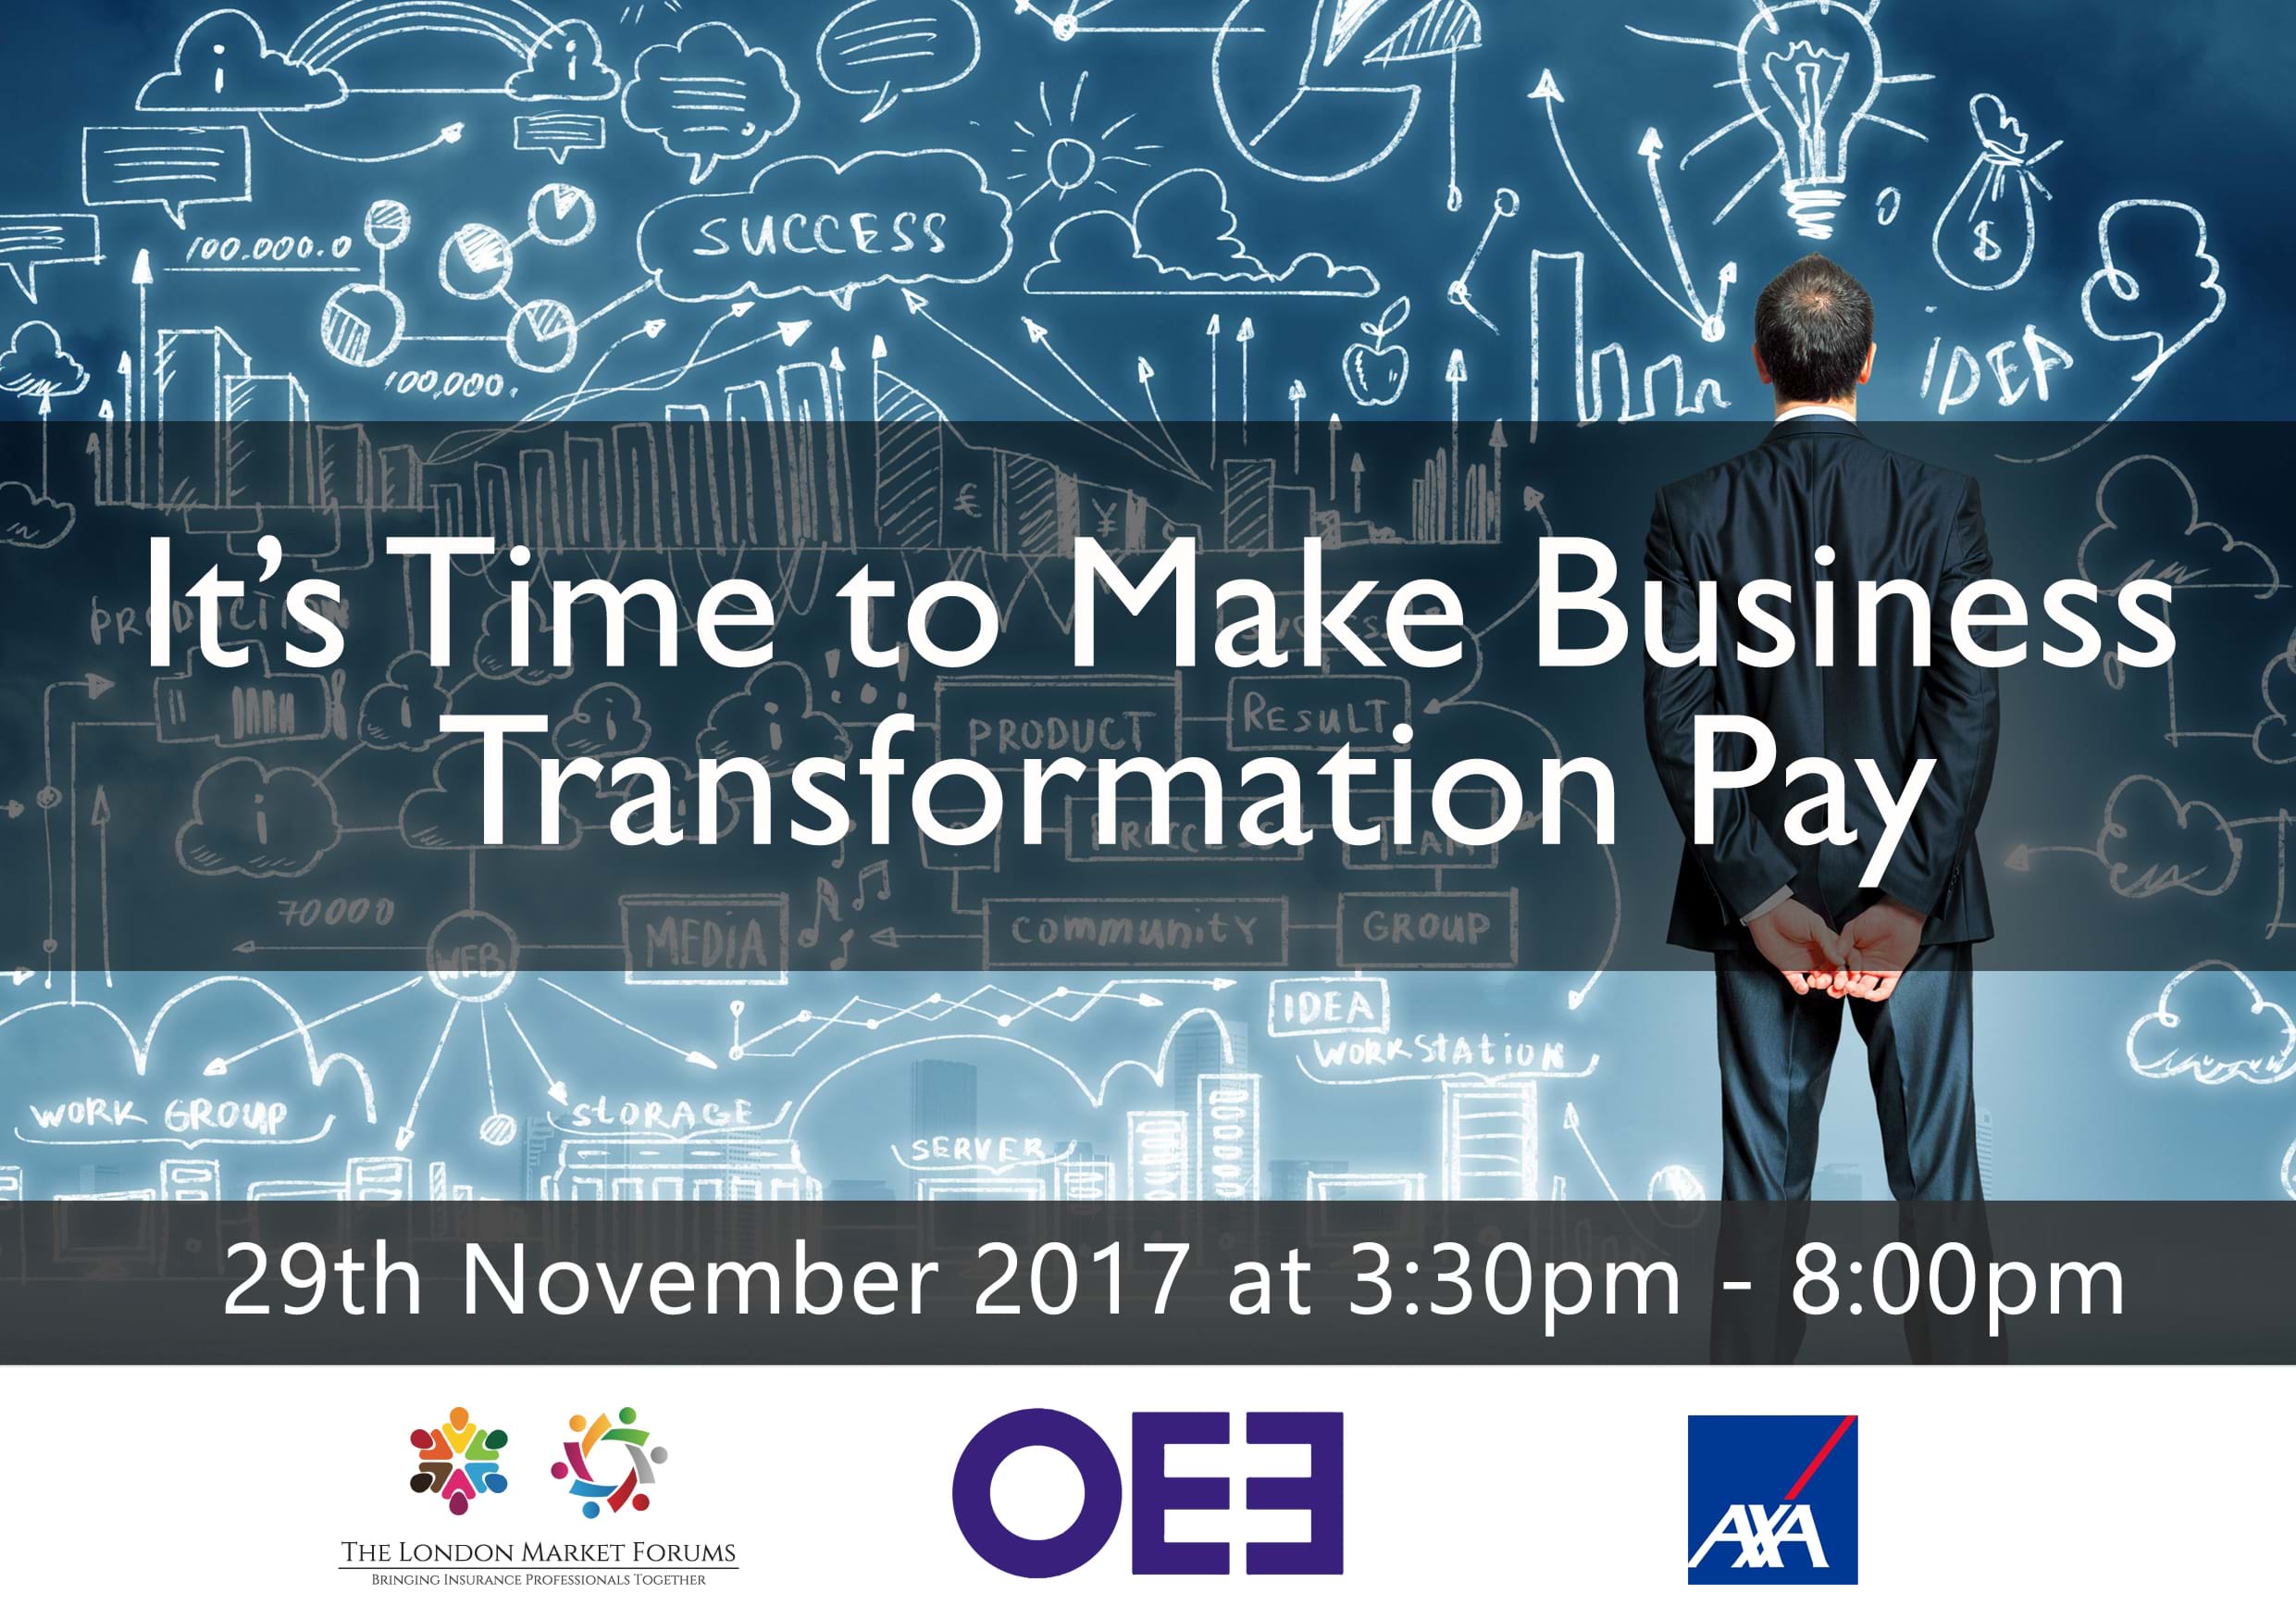 It's Time to Make Business Transformation Pay